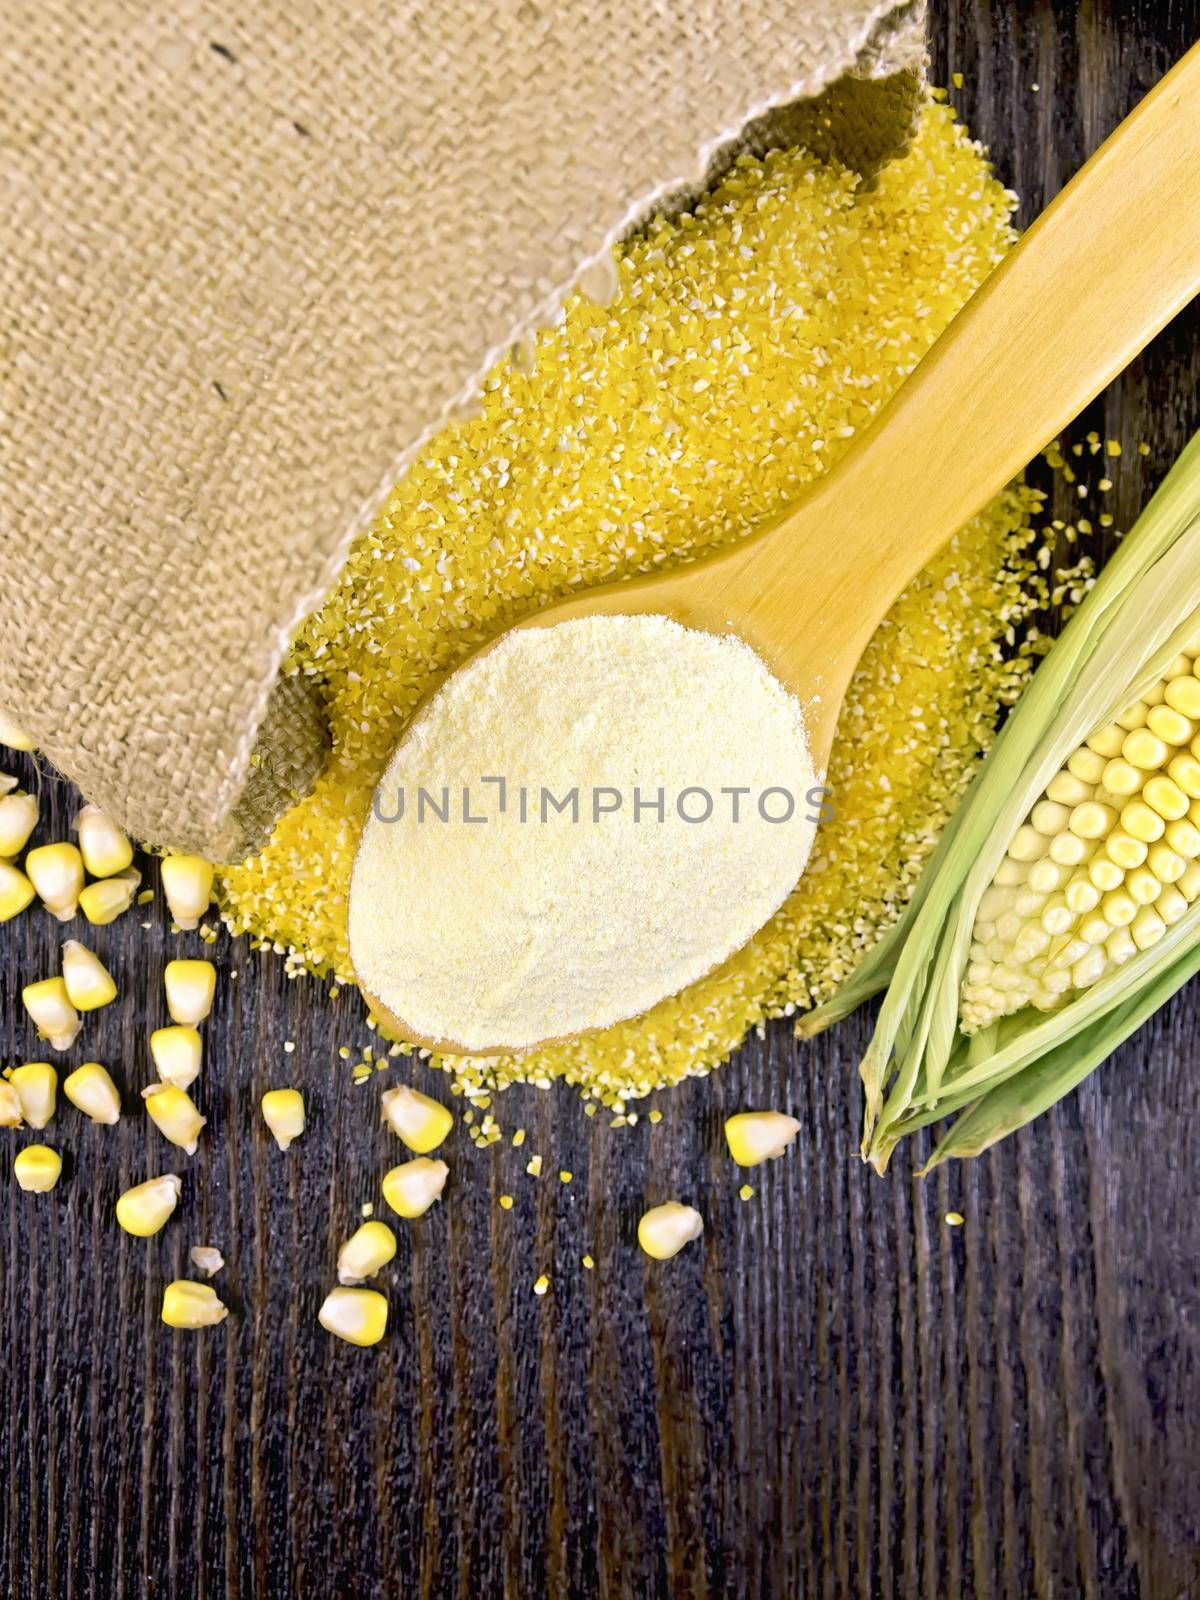 Flour corn in a spoon, cereal in sackcloth and on the table, the cob on the background of the wooden boards on top